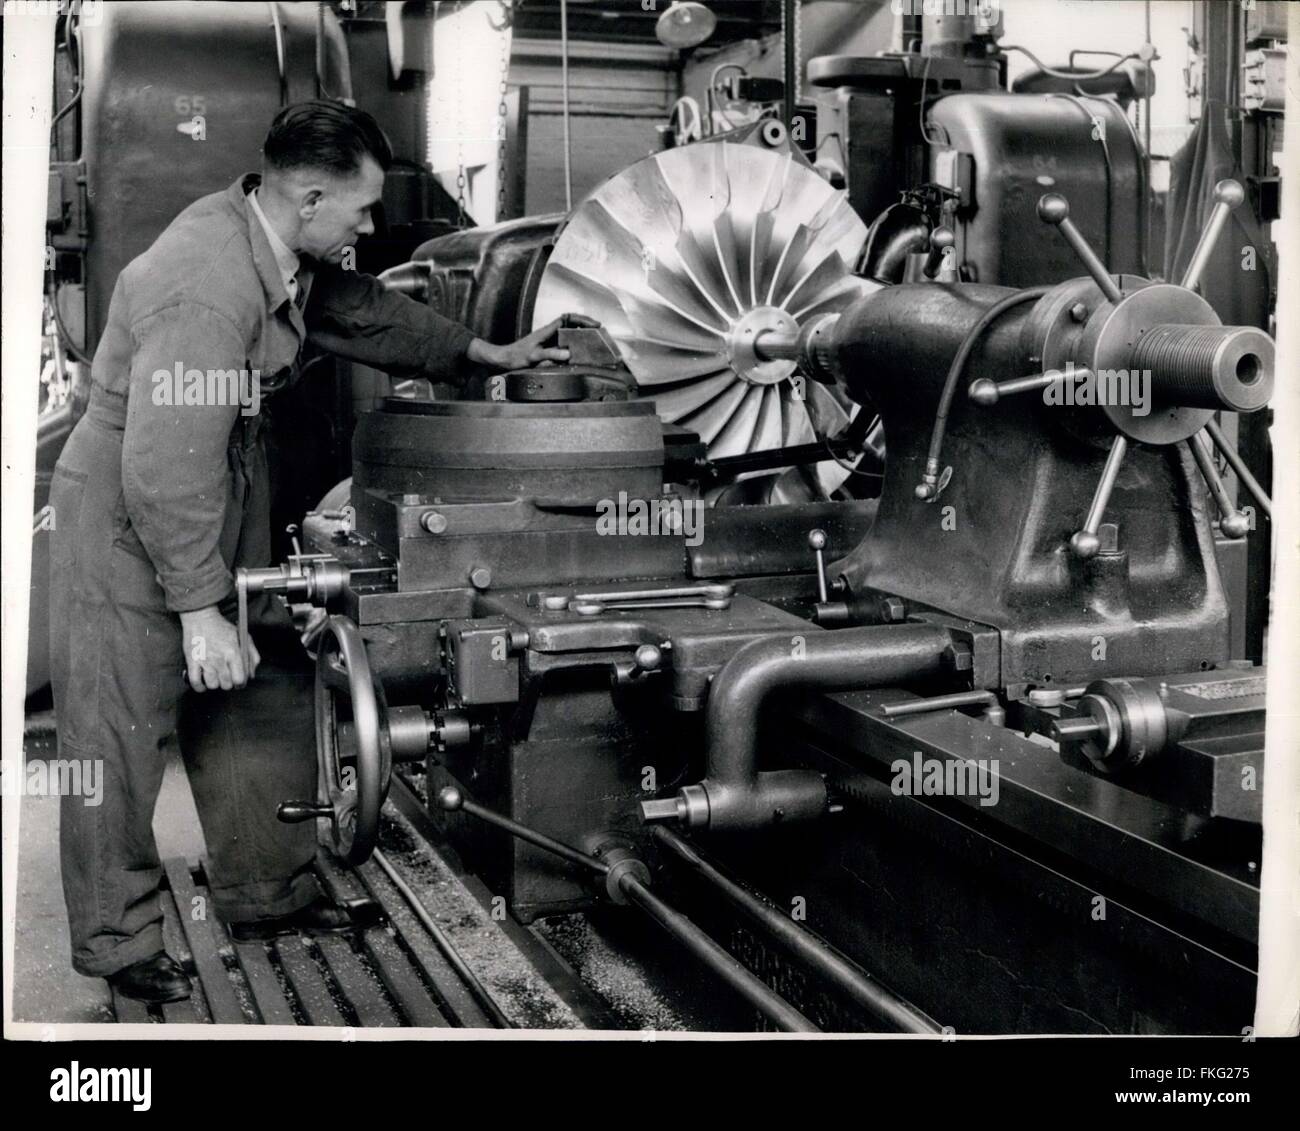 1957 - Working On A Goblin Jet Engine: Form turning animpeller of a Goblin Jet, one of the hundreds of operations that go into making these units which power the Vampire fighter planes of the R.A.F. Airplane engine jet plane © Keystone Pictures USA/ZUMAPRESS.com/Alamy Live News Stock Photo